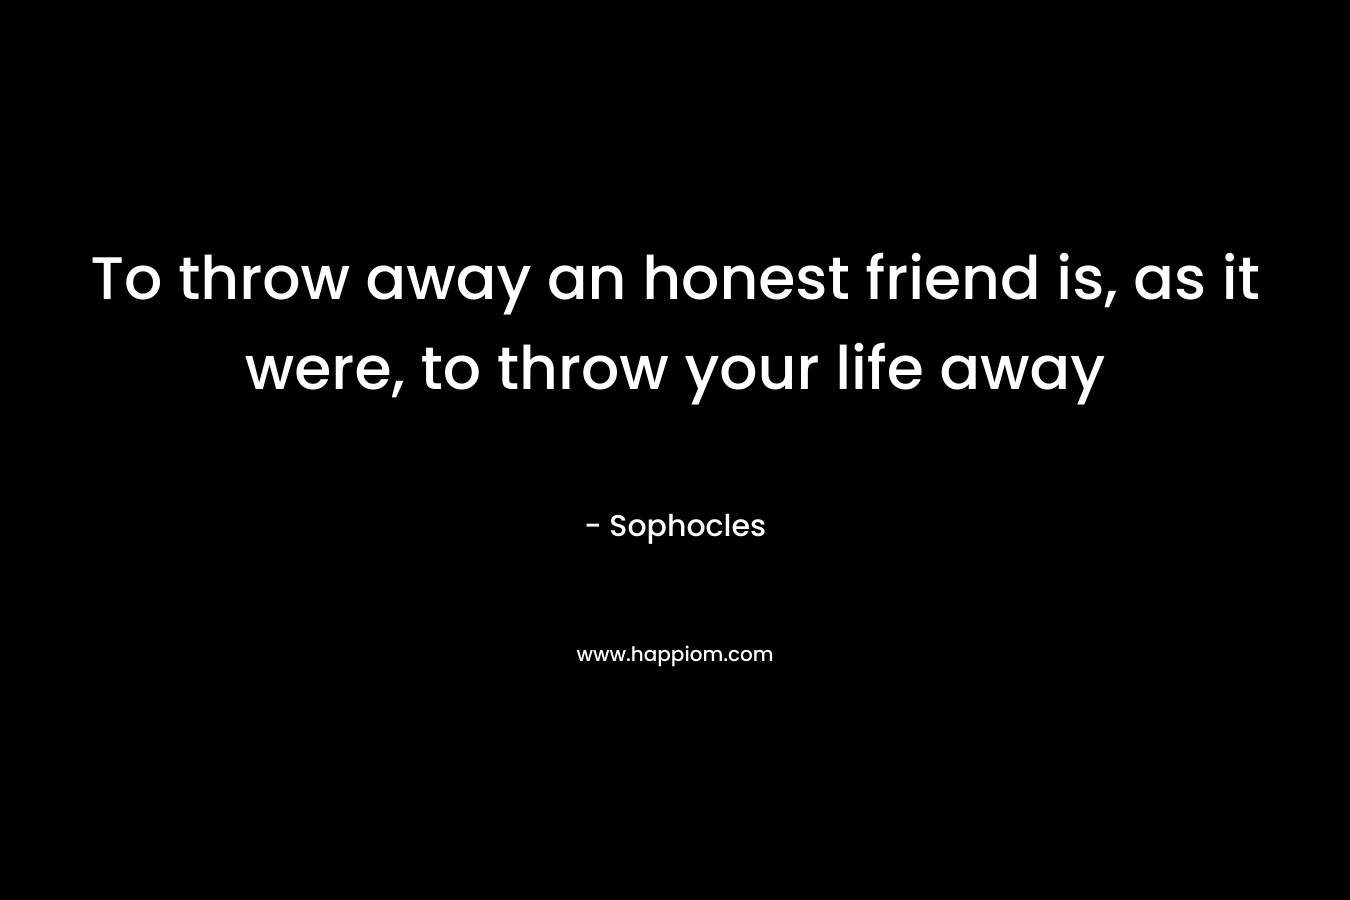 To throw away an honest friend is, as it were, to throw your life away